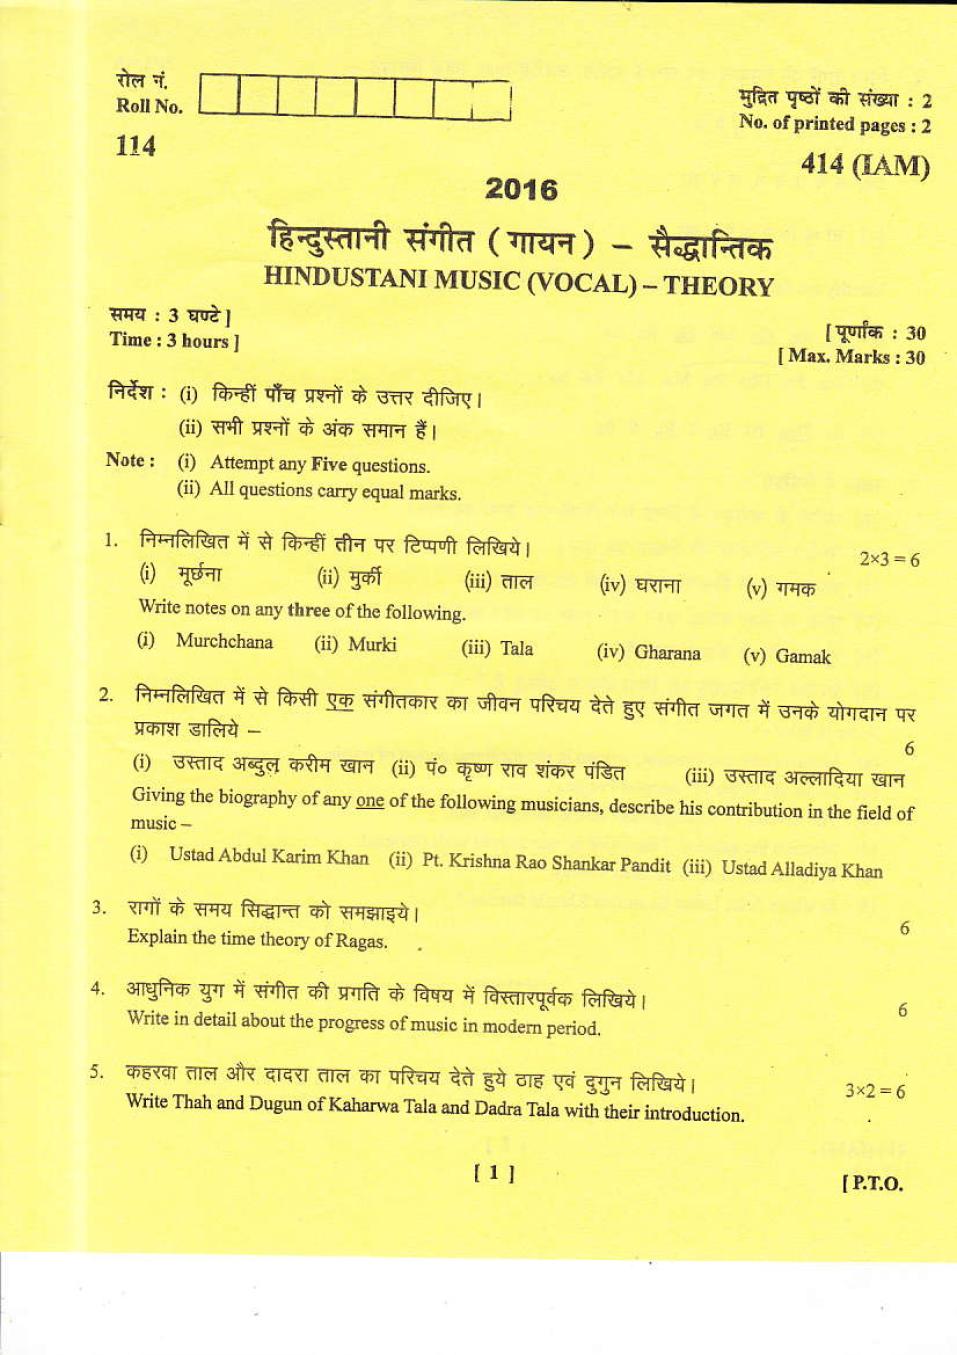 Uttarakhand Board Class 12 Question Paper 2016 for Hindustani Music (Vocal) - Theory - Page 1